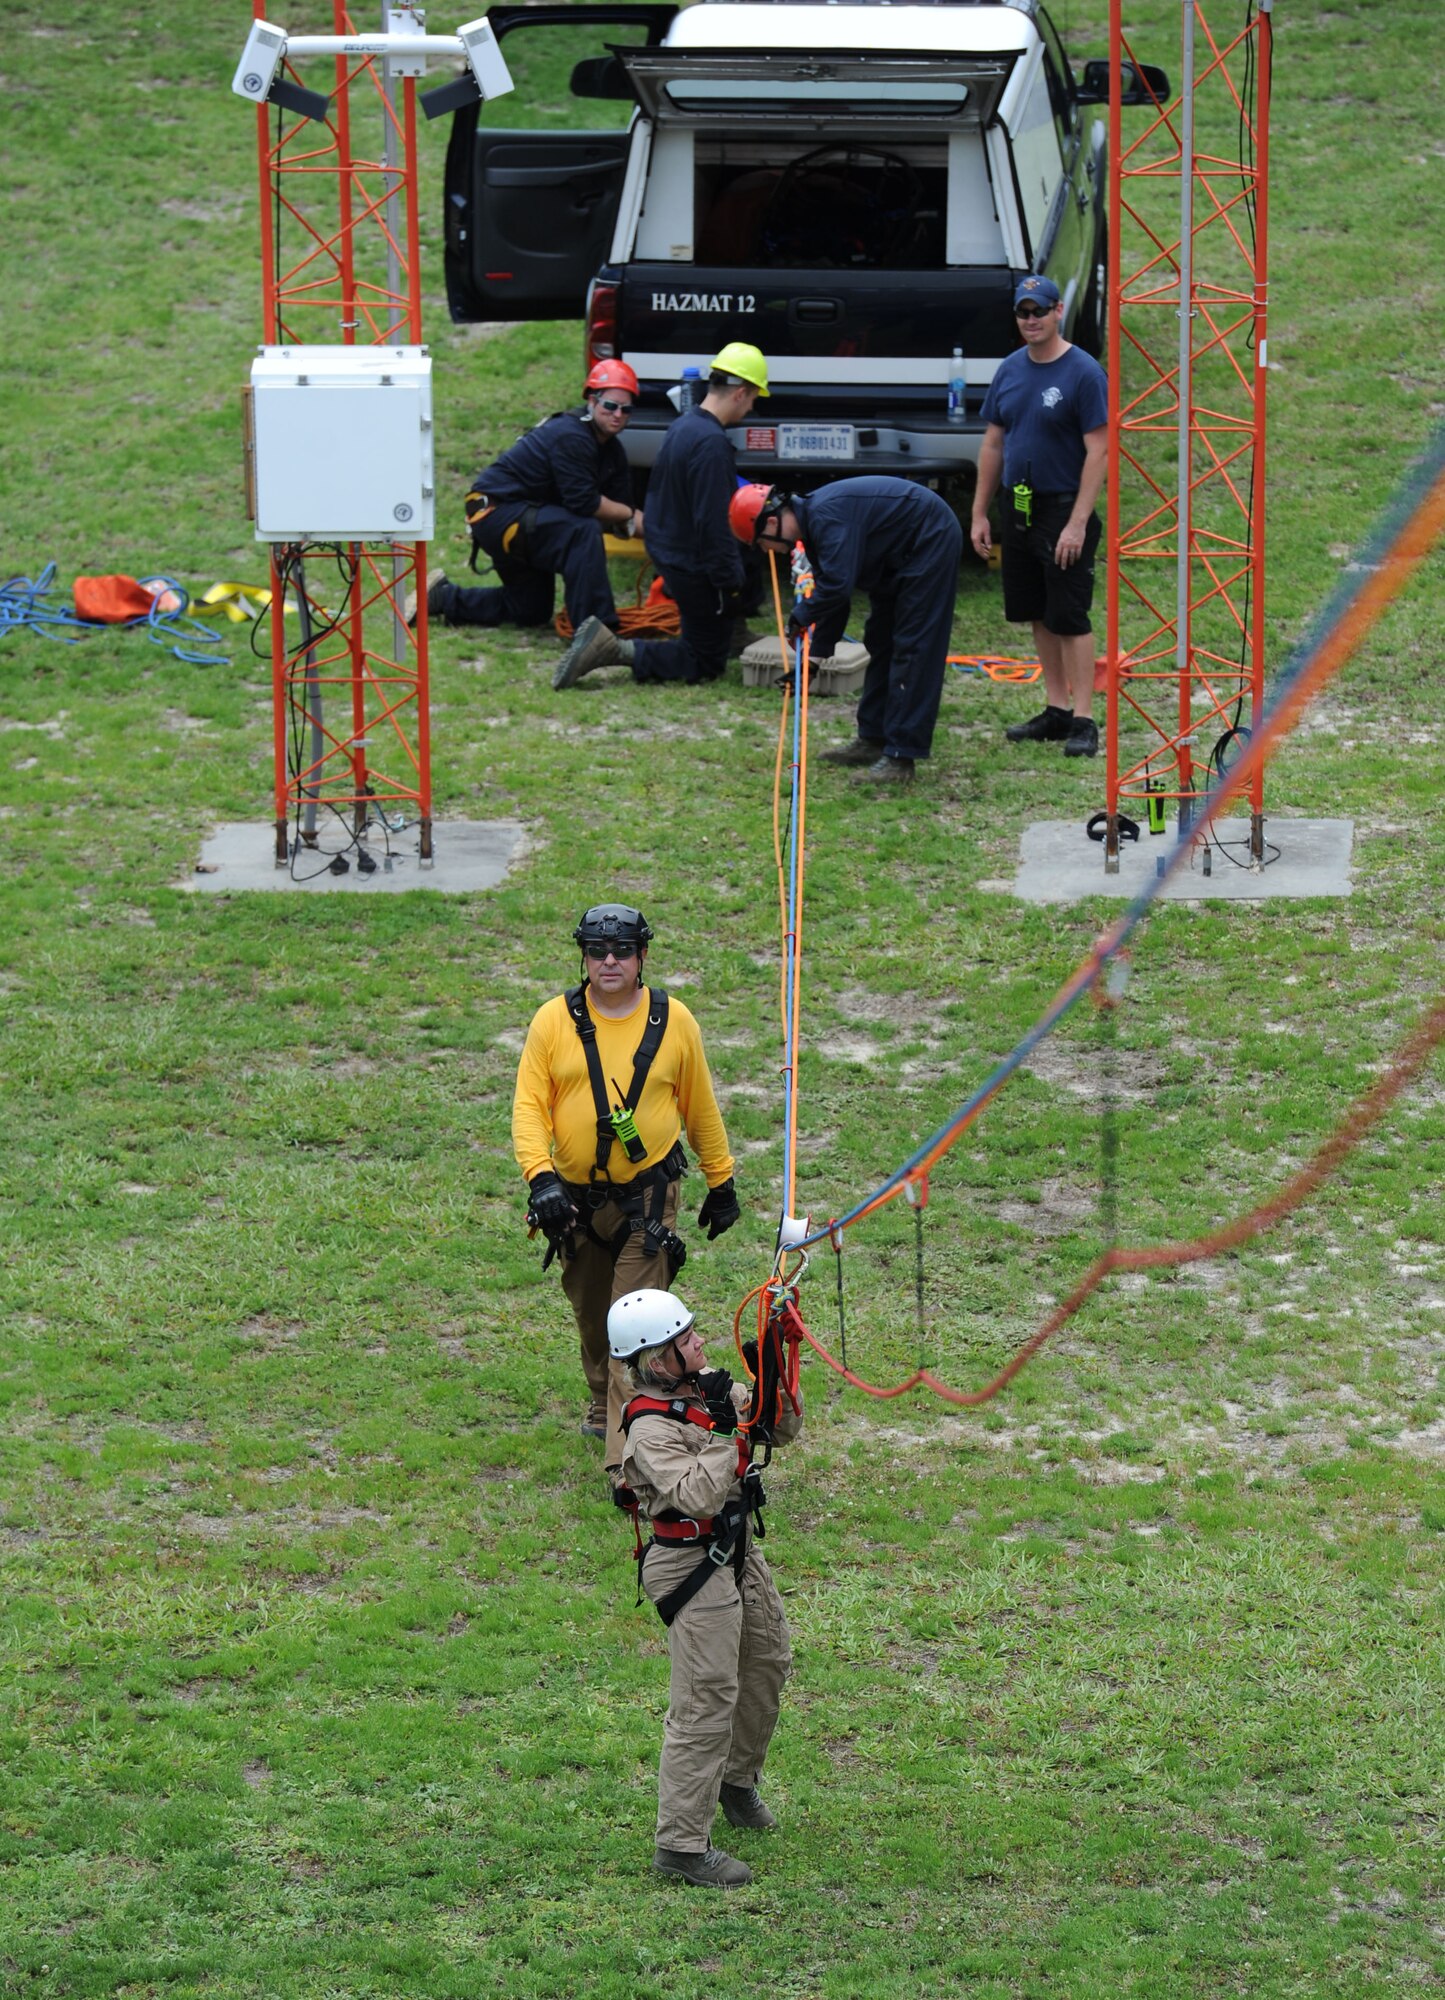 Members of the Keesler and Biloxi Fire Department, participate in a controlled descent exercise atop of the Weather Training Complex during rope rescue operations training June 14, 2017, on Keesler Air Force Base, Miss. Keesler hosted the advanced rescue certification training course, which consisted of confined space rescue, high and low angle rescue and stokes basket rescue operations. (U.S. Air Force photo by Kemberly Groue)